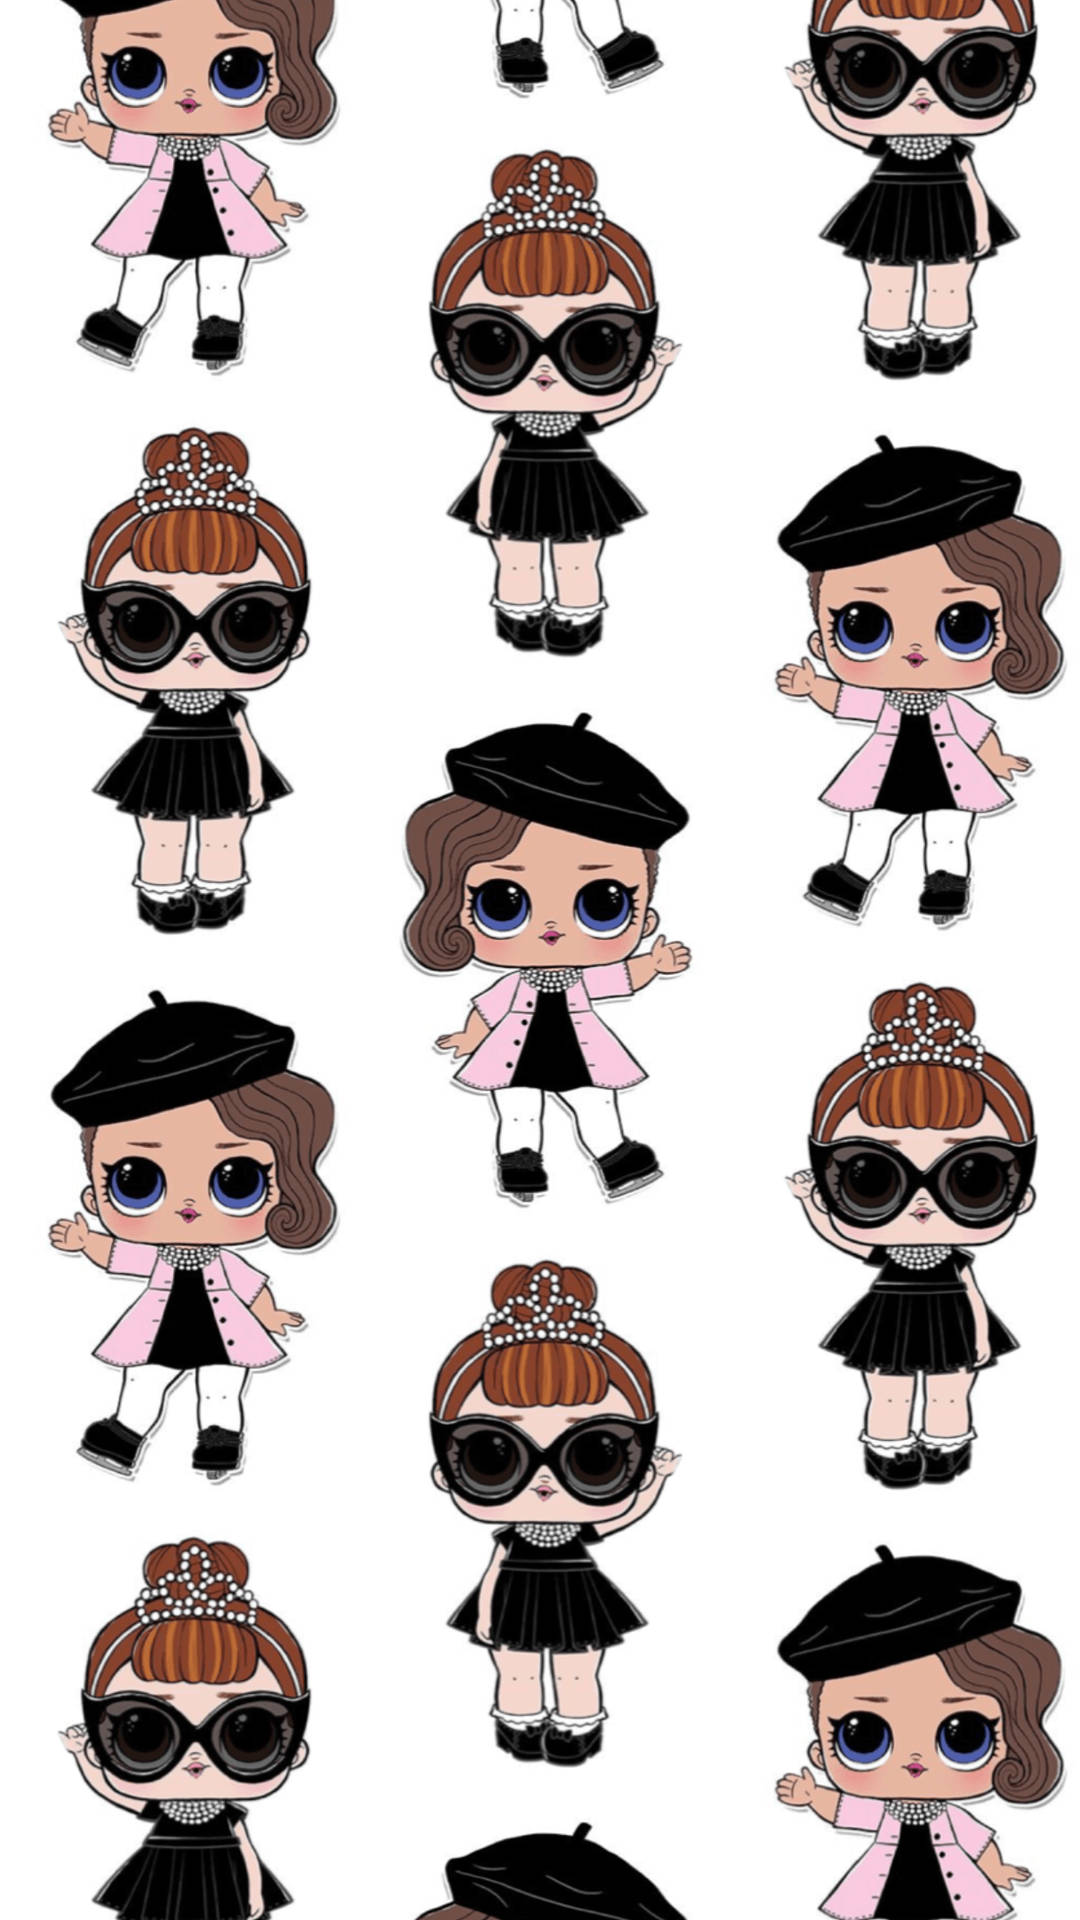 Stunning Lol Surprise Dolls With Chic Berets And Sparkling Crowns